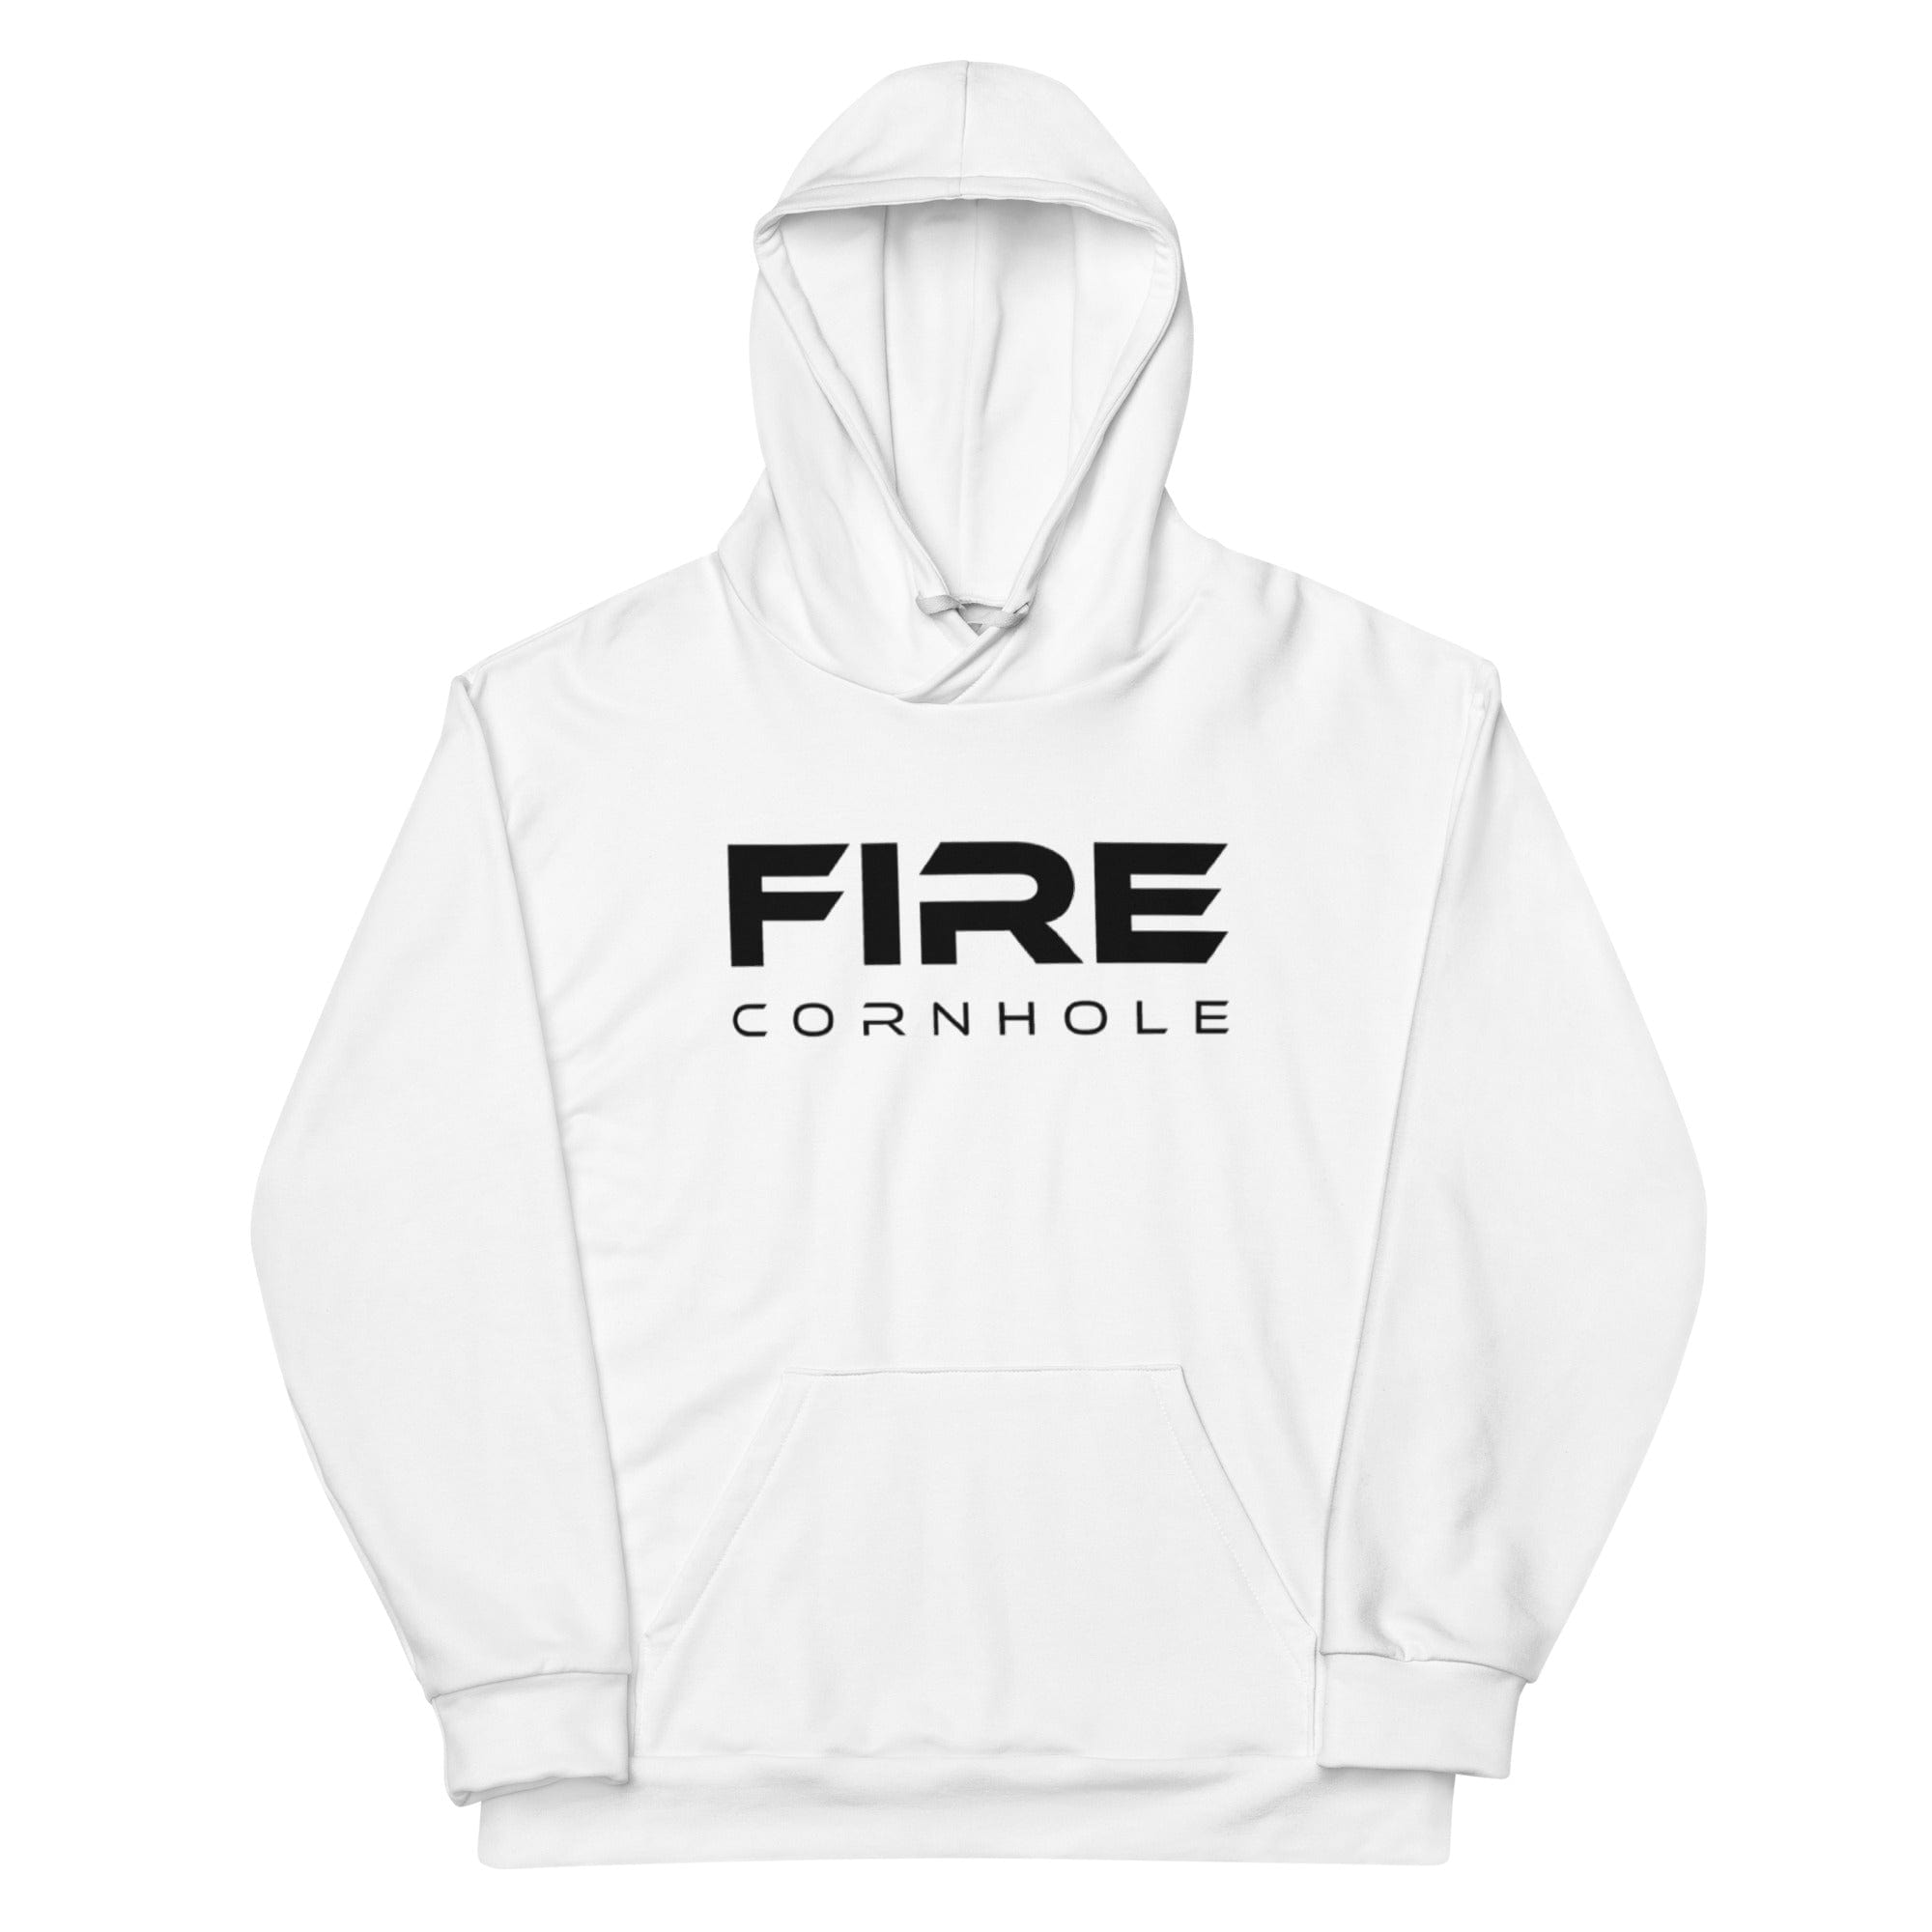 Front view of white unisex fleece hoodie with Fire Cornhole logo in black